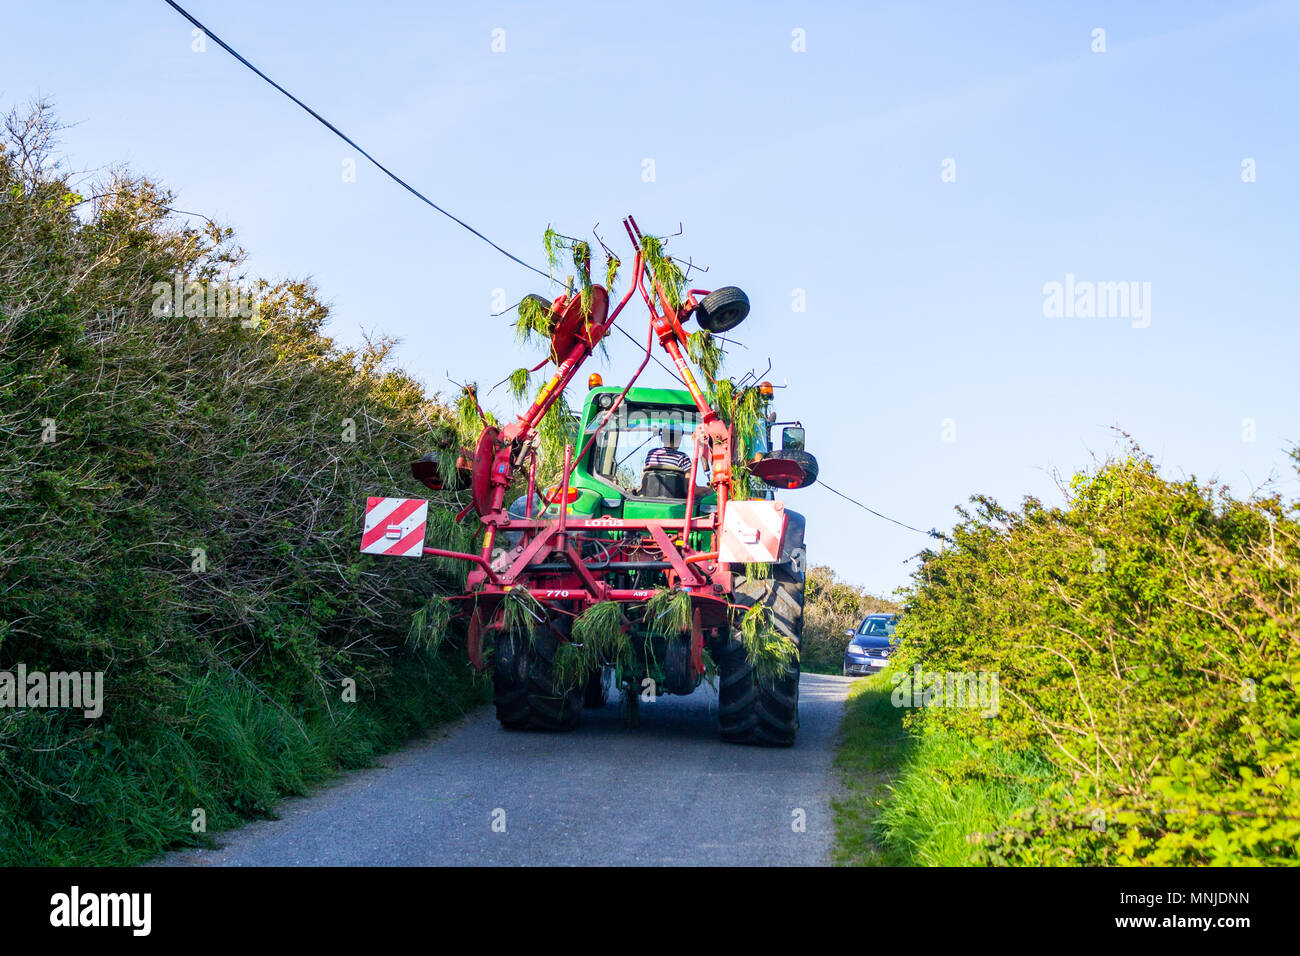 tractor with a set of spinners on the back driving up a country lane in ireland after turning over cut grass for silage. Stock Photo